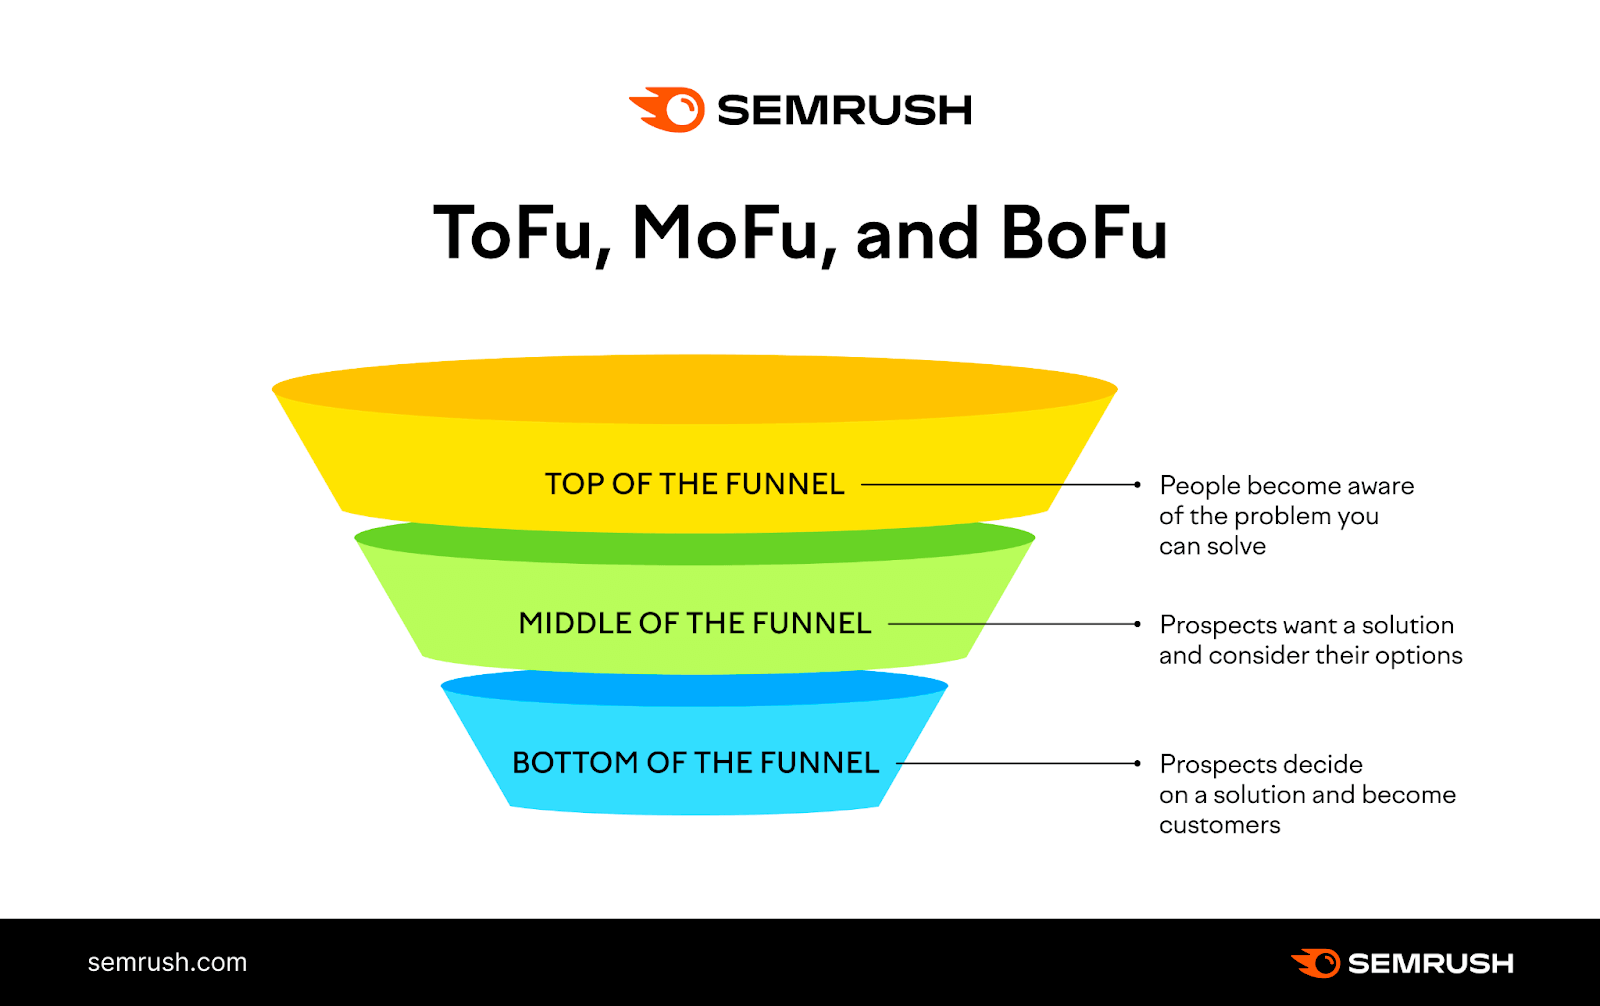 top of funnel is people becoming aware of the problem you solve, middle of funnel is the prospect wanting a solution and considering their options, bottom of funnel is prospect deciding a solution